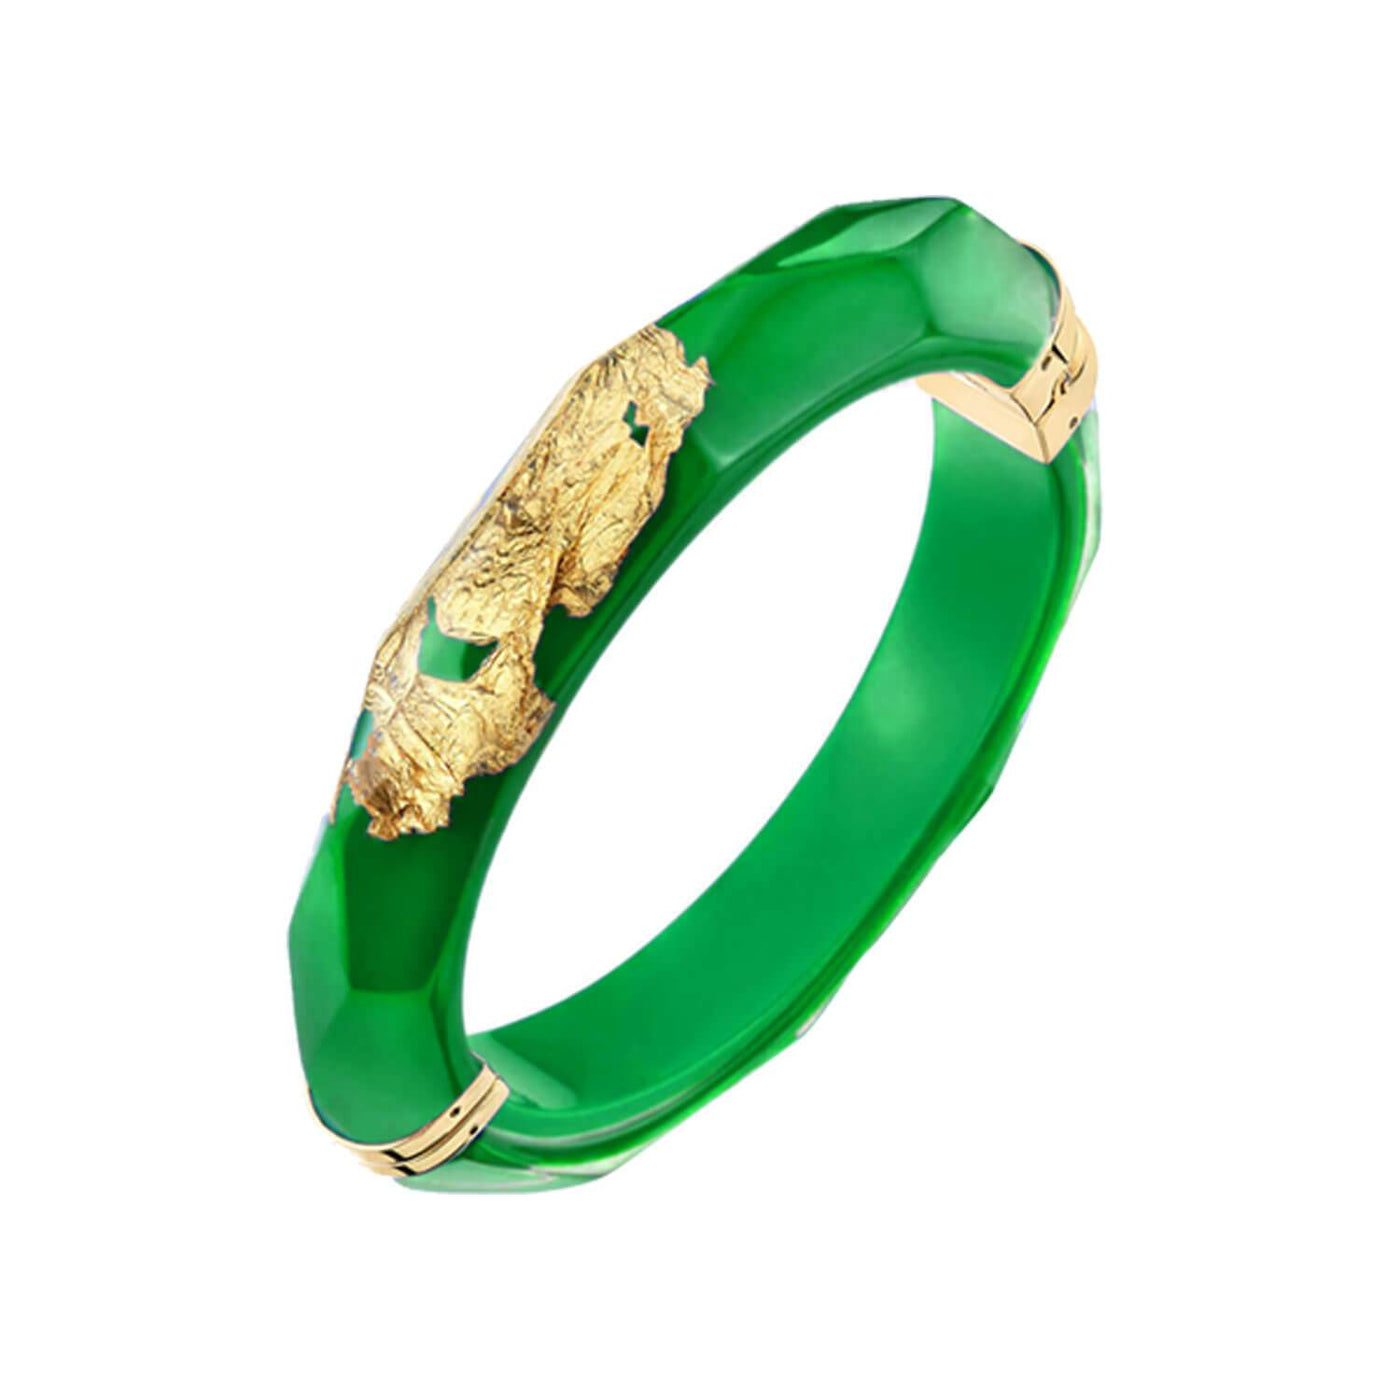 24K Gold Leaf Thin Faceted Lucite Bangle - DARK GREEN